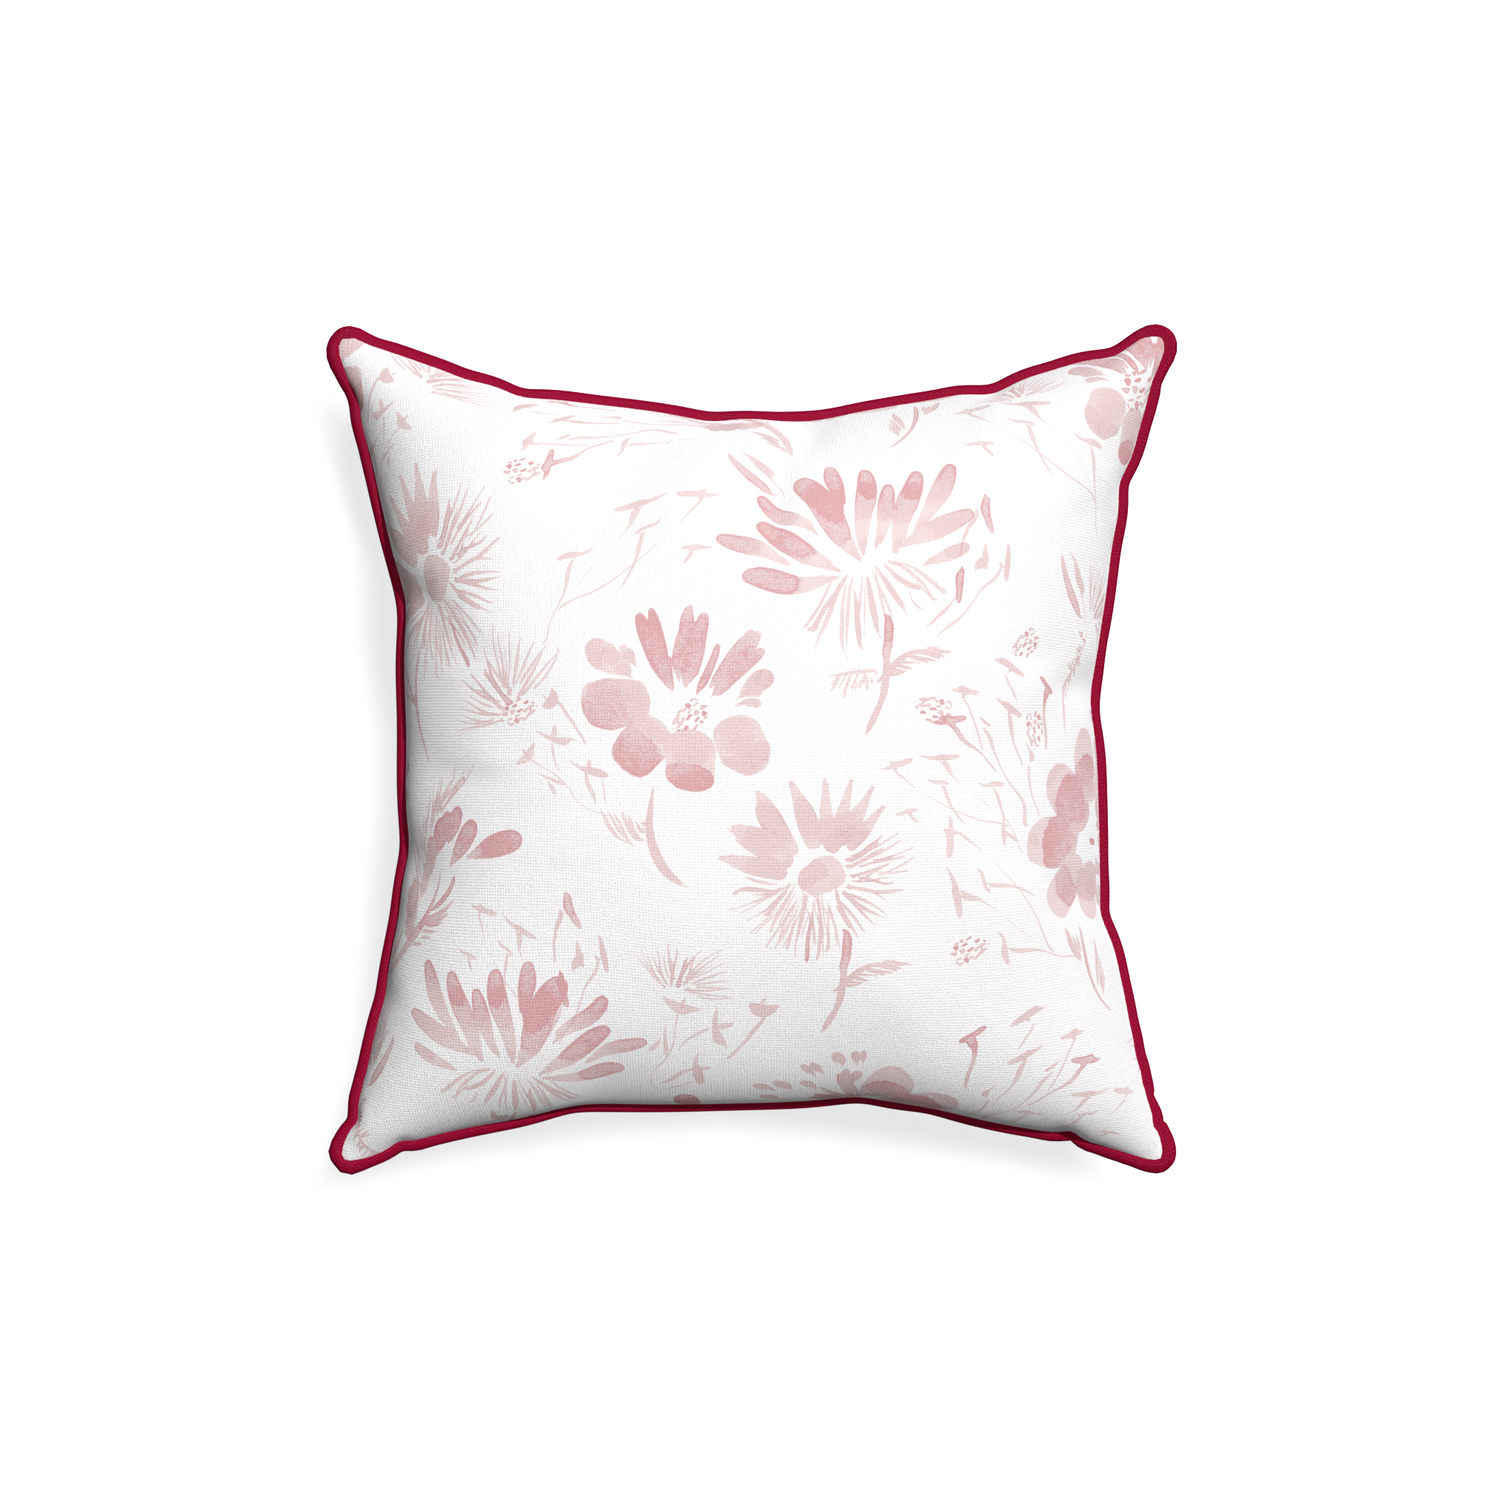 18-square blake custom pillow with raspberry piping on white background